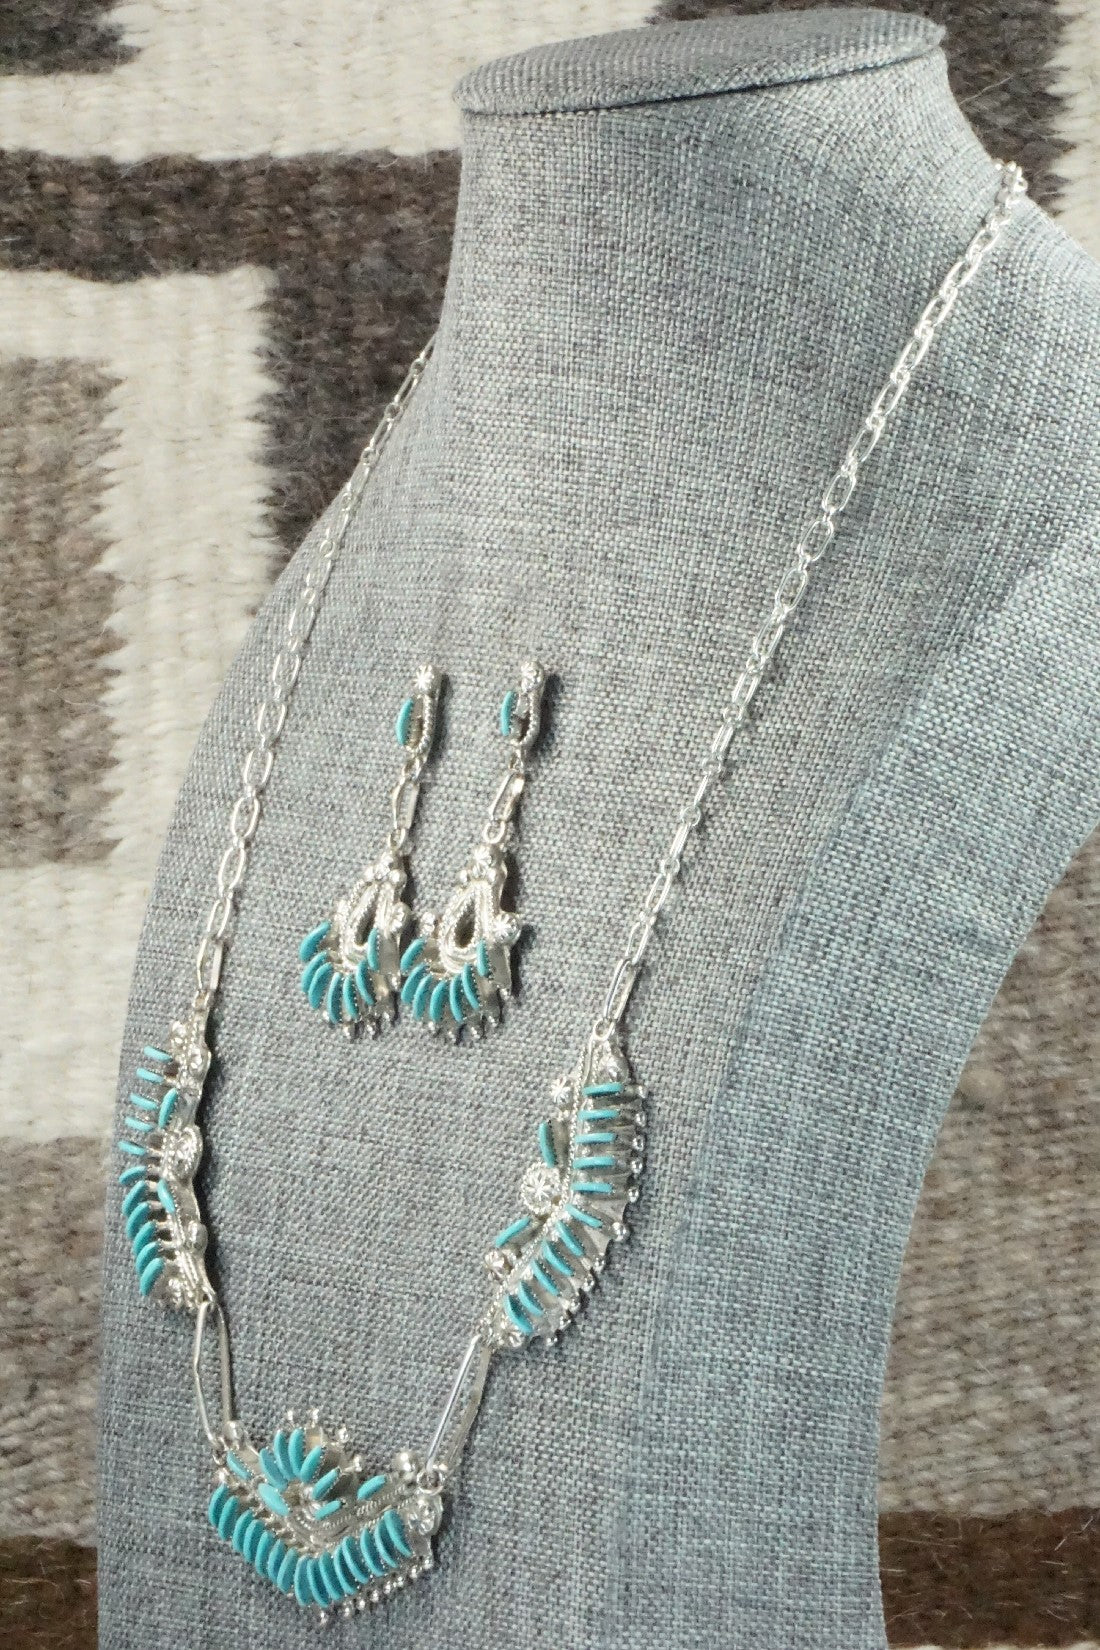 Turquoise & Sterling Silver Necklace and Earrings Set - Bernadette Wyaco